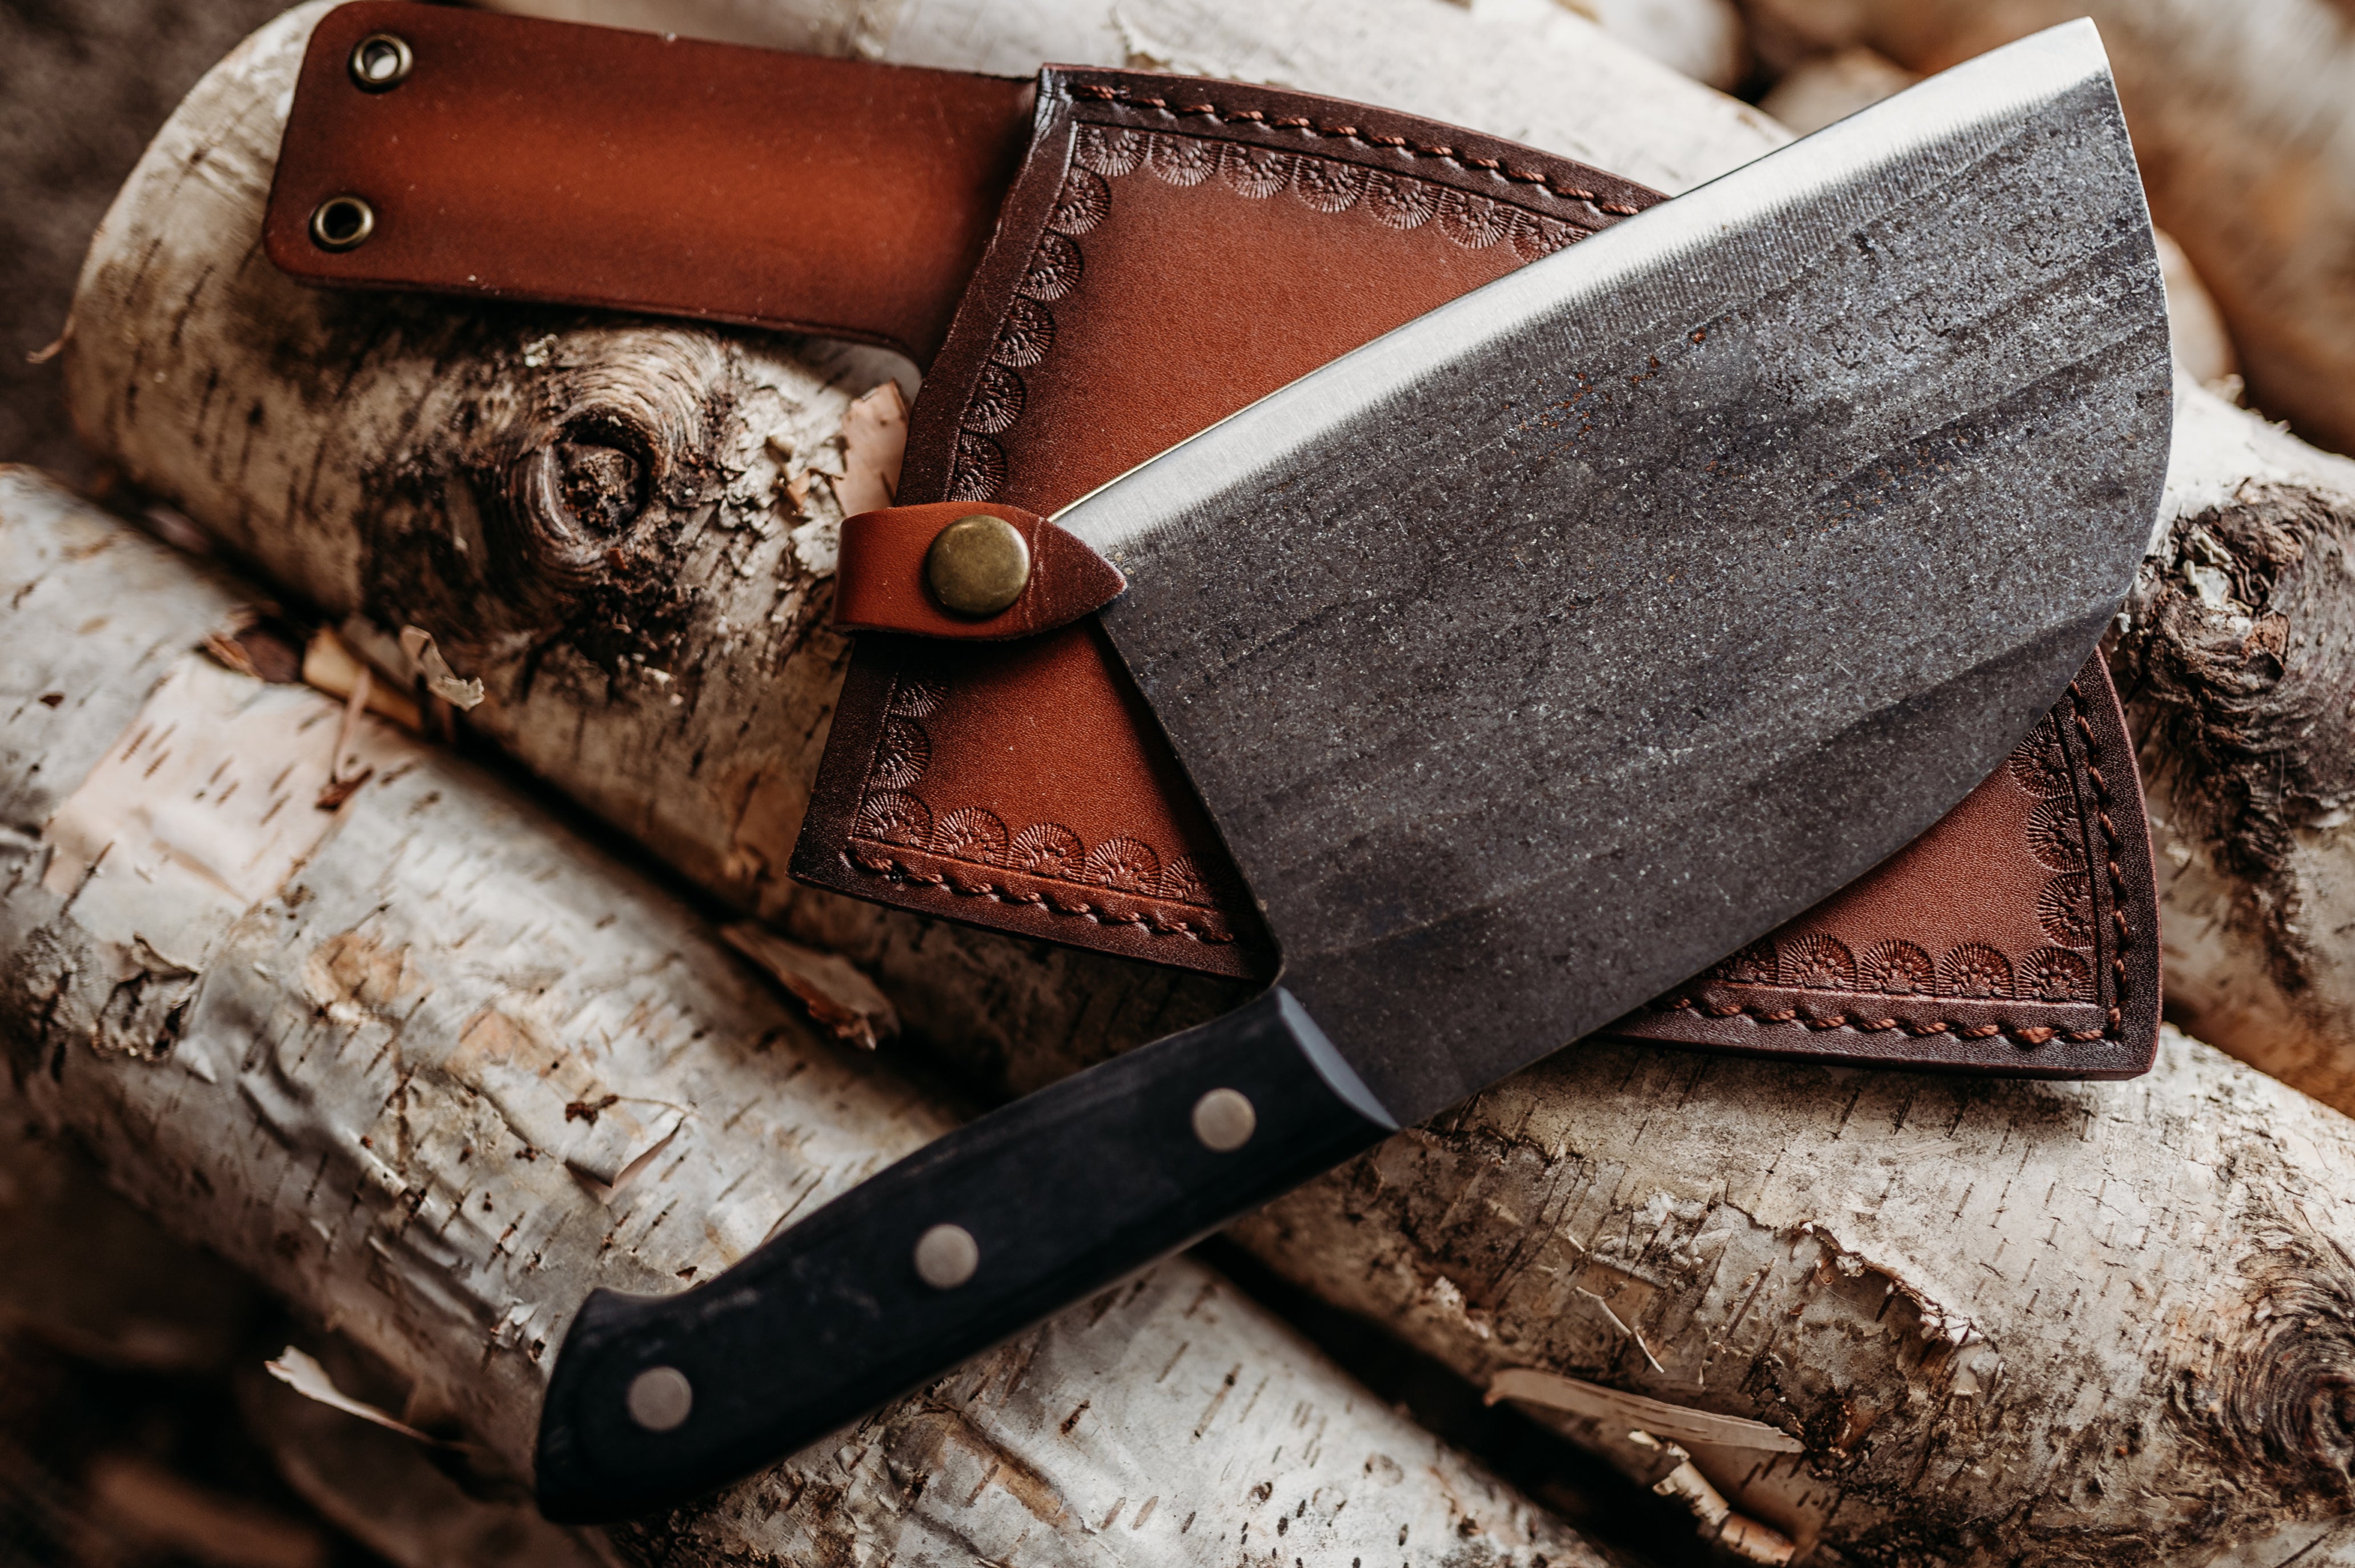 Knives & Tools, Shop 100+ of the Best Knives